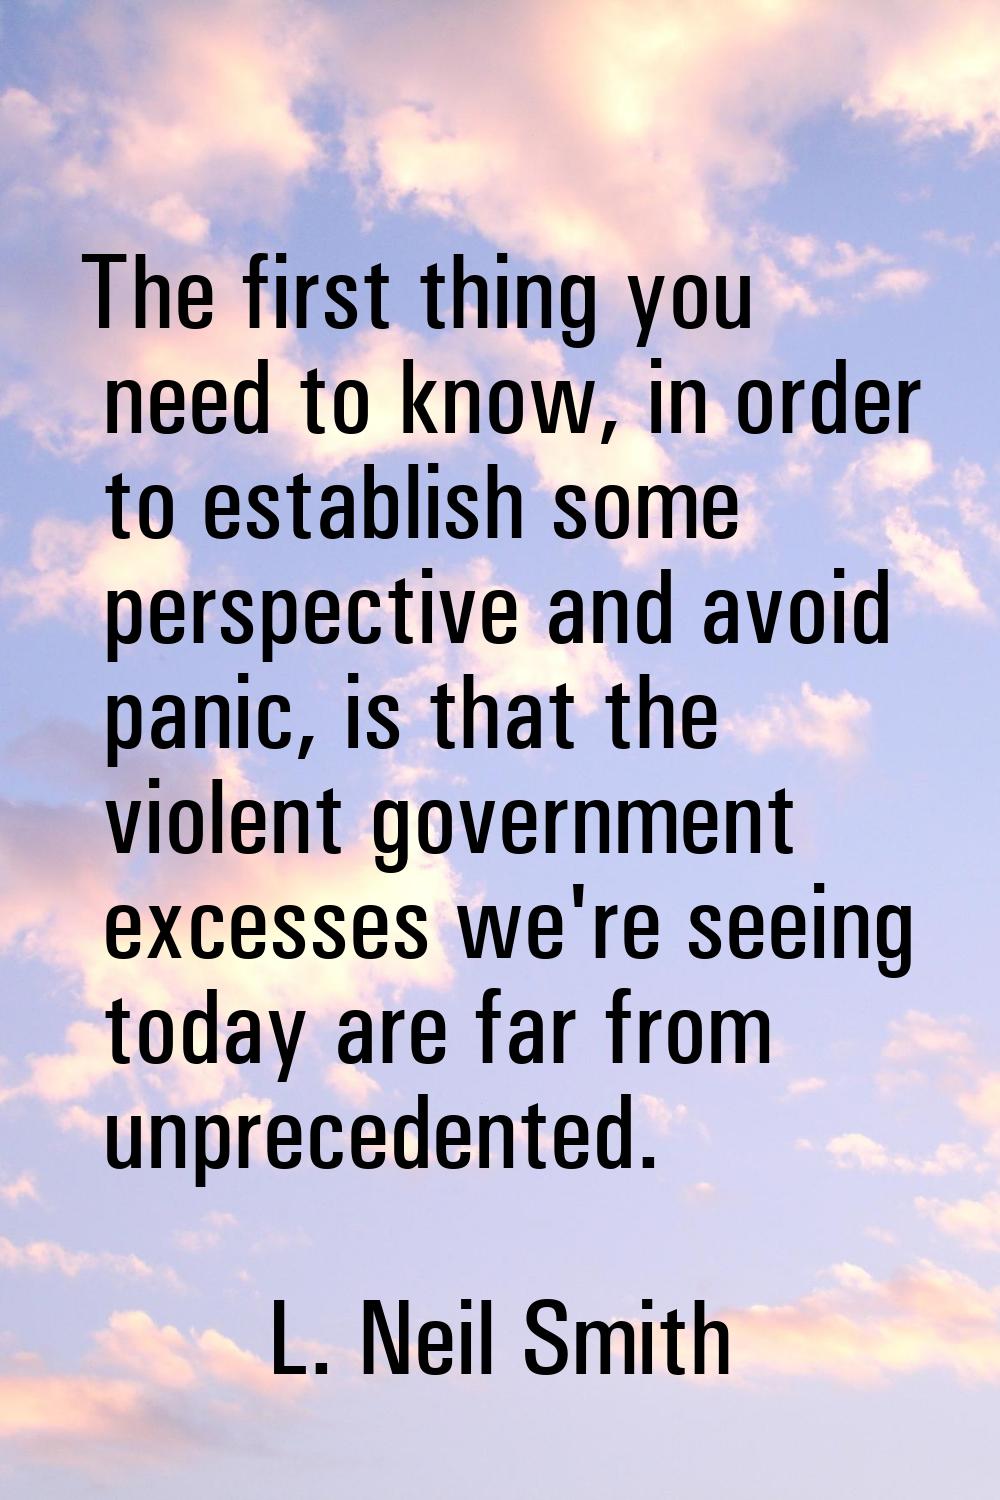 The first thing you need to know, in order to establish some perspective and avoid panic, is that t